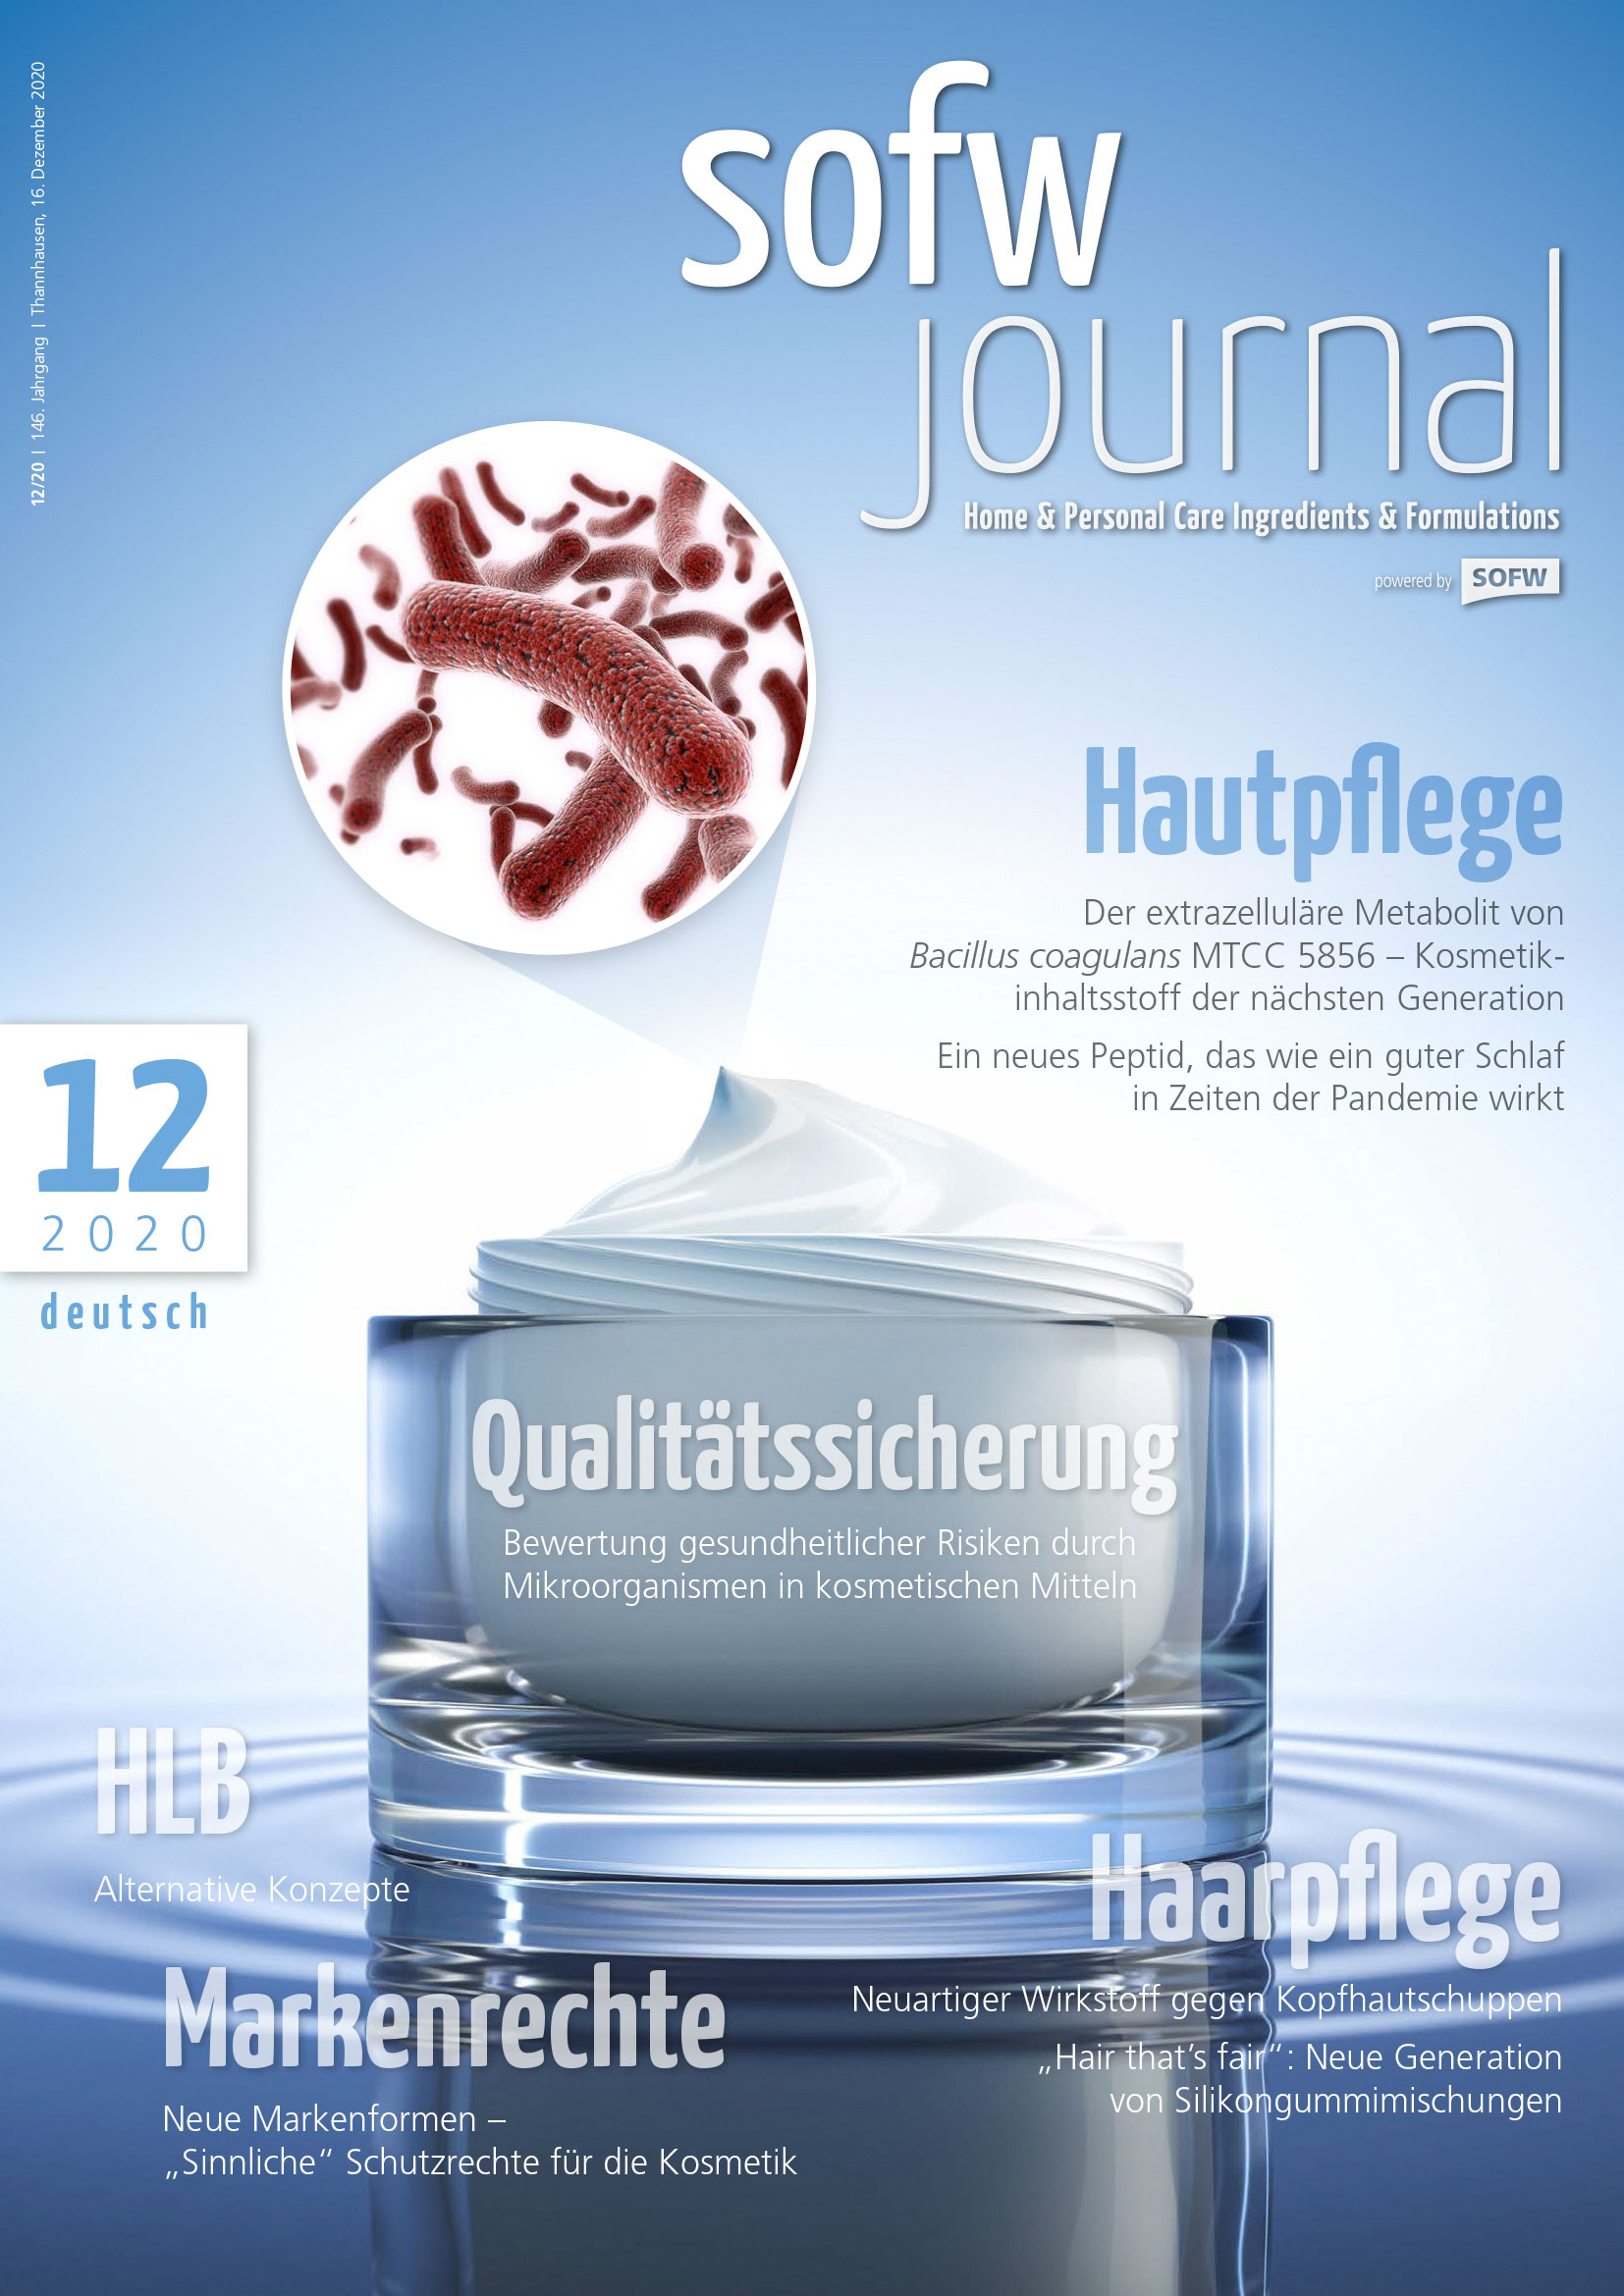 sofw_2012_ger_cover